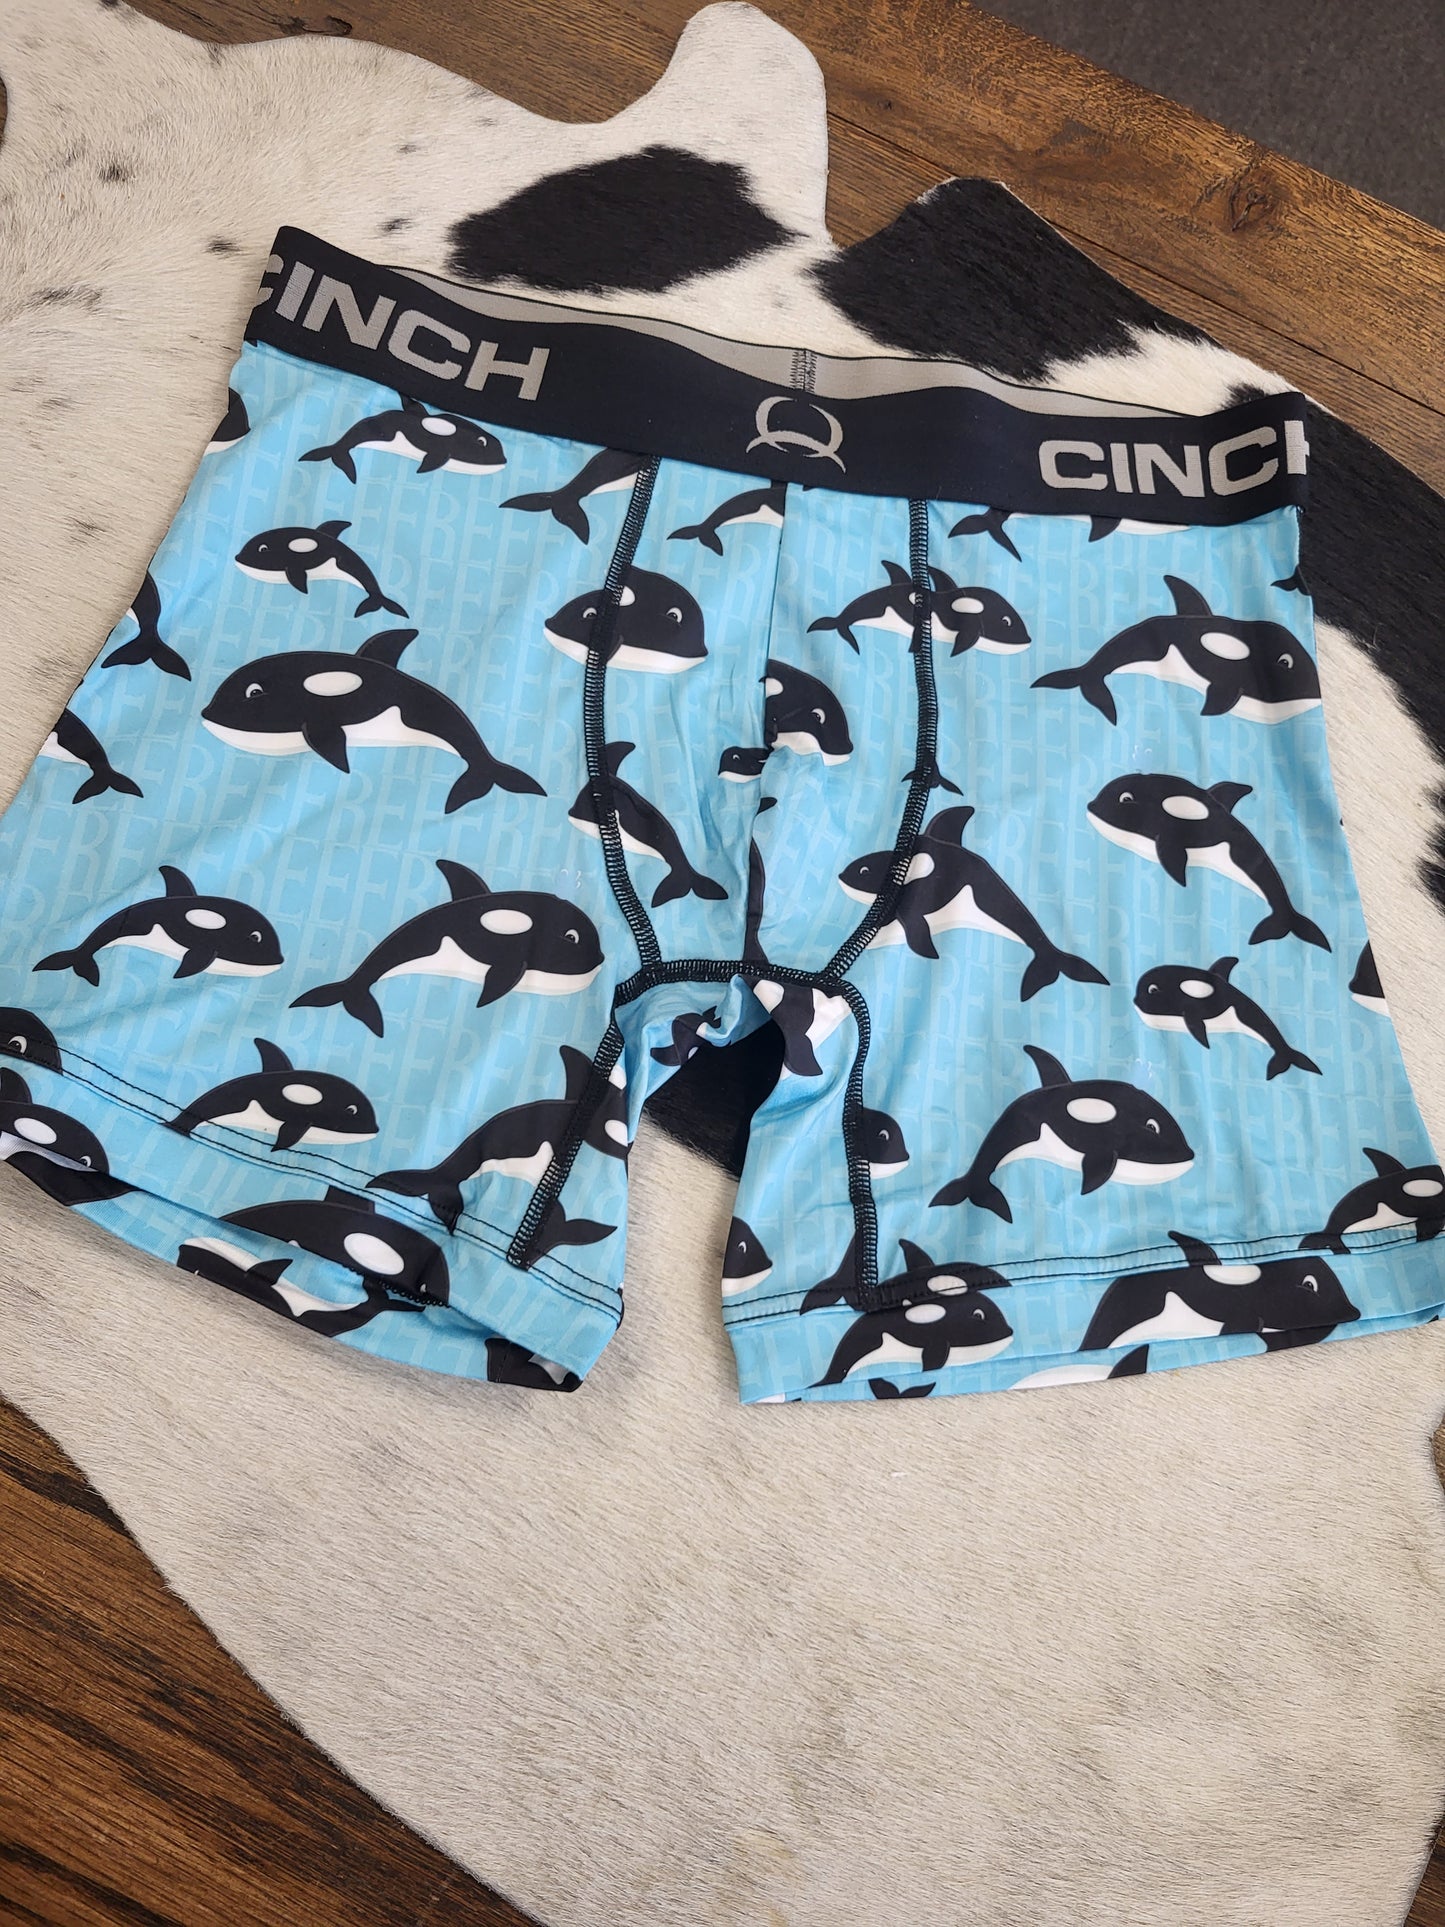 CINCH 6" WHALE BOXERS